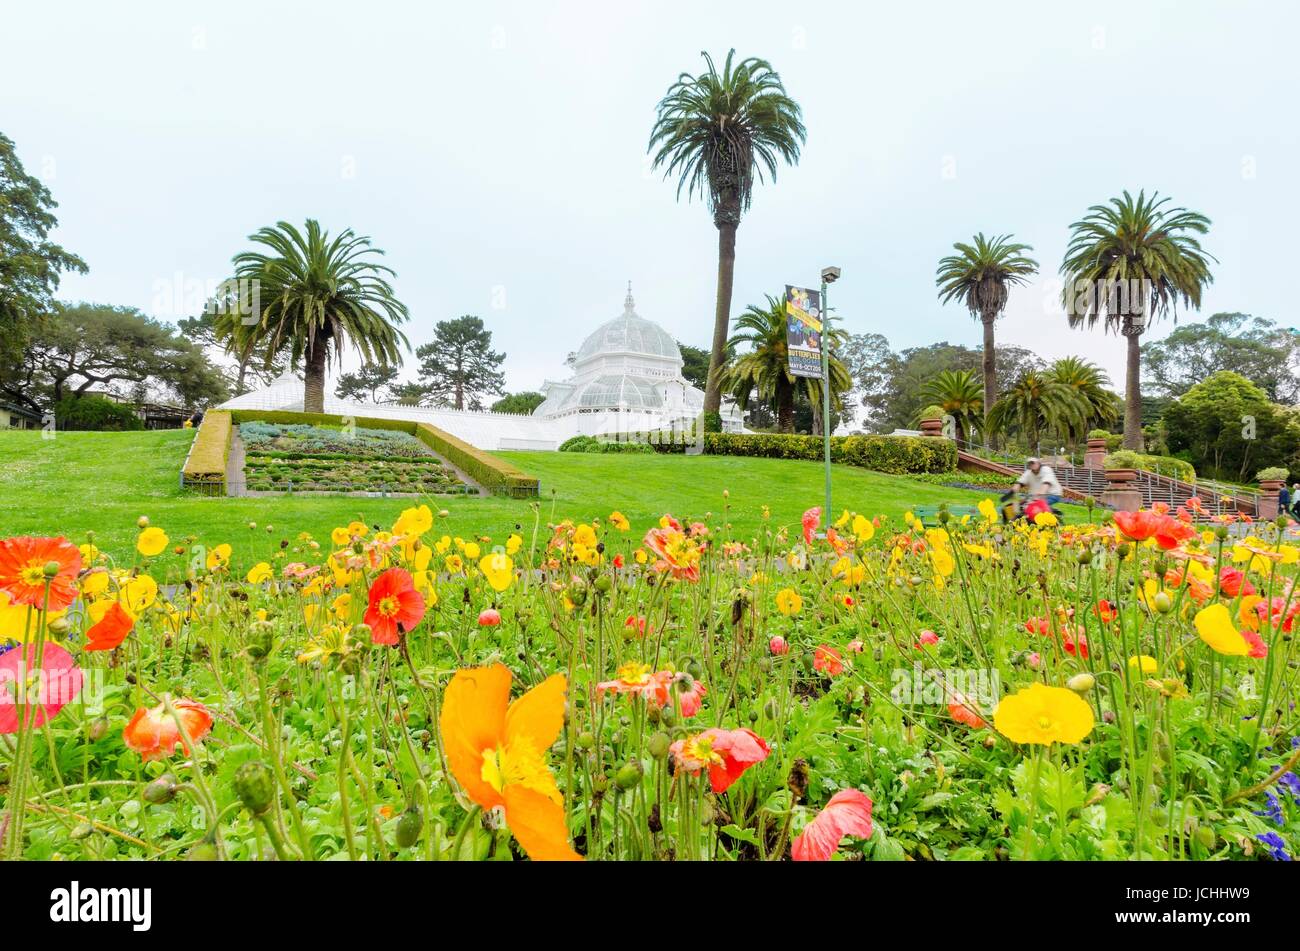 The garden of the Conservatory of flowers in San Francisco, California, United States of America. A greenhouse, botanical garden and historic landmark of traditional wooden Victorian architecture in Golden Gate park. Stock Photo